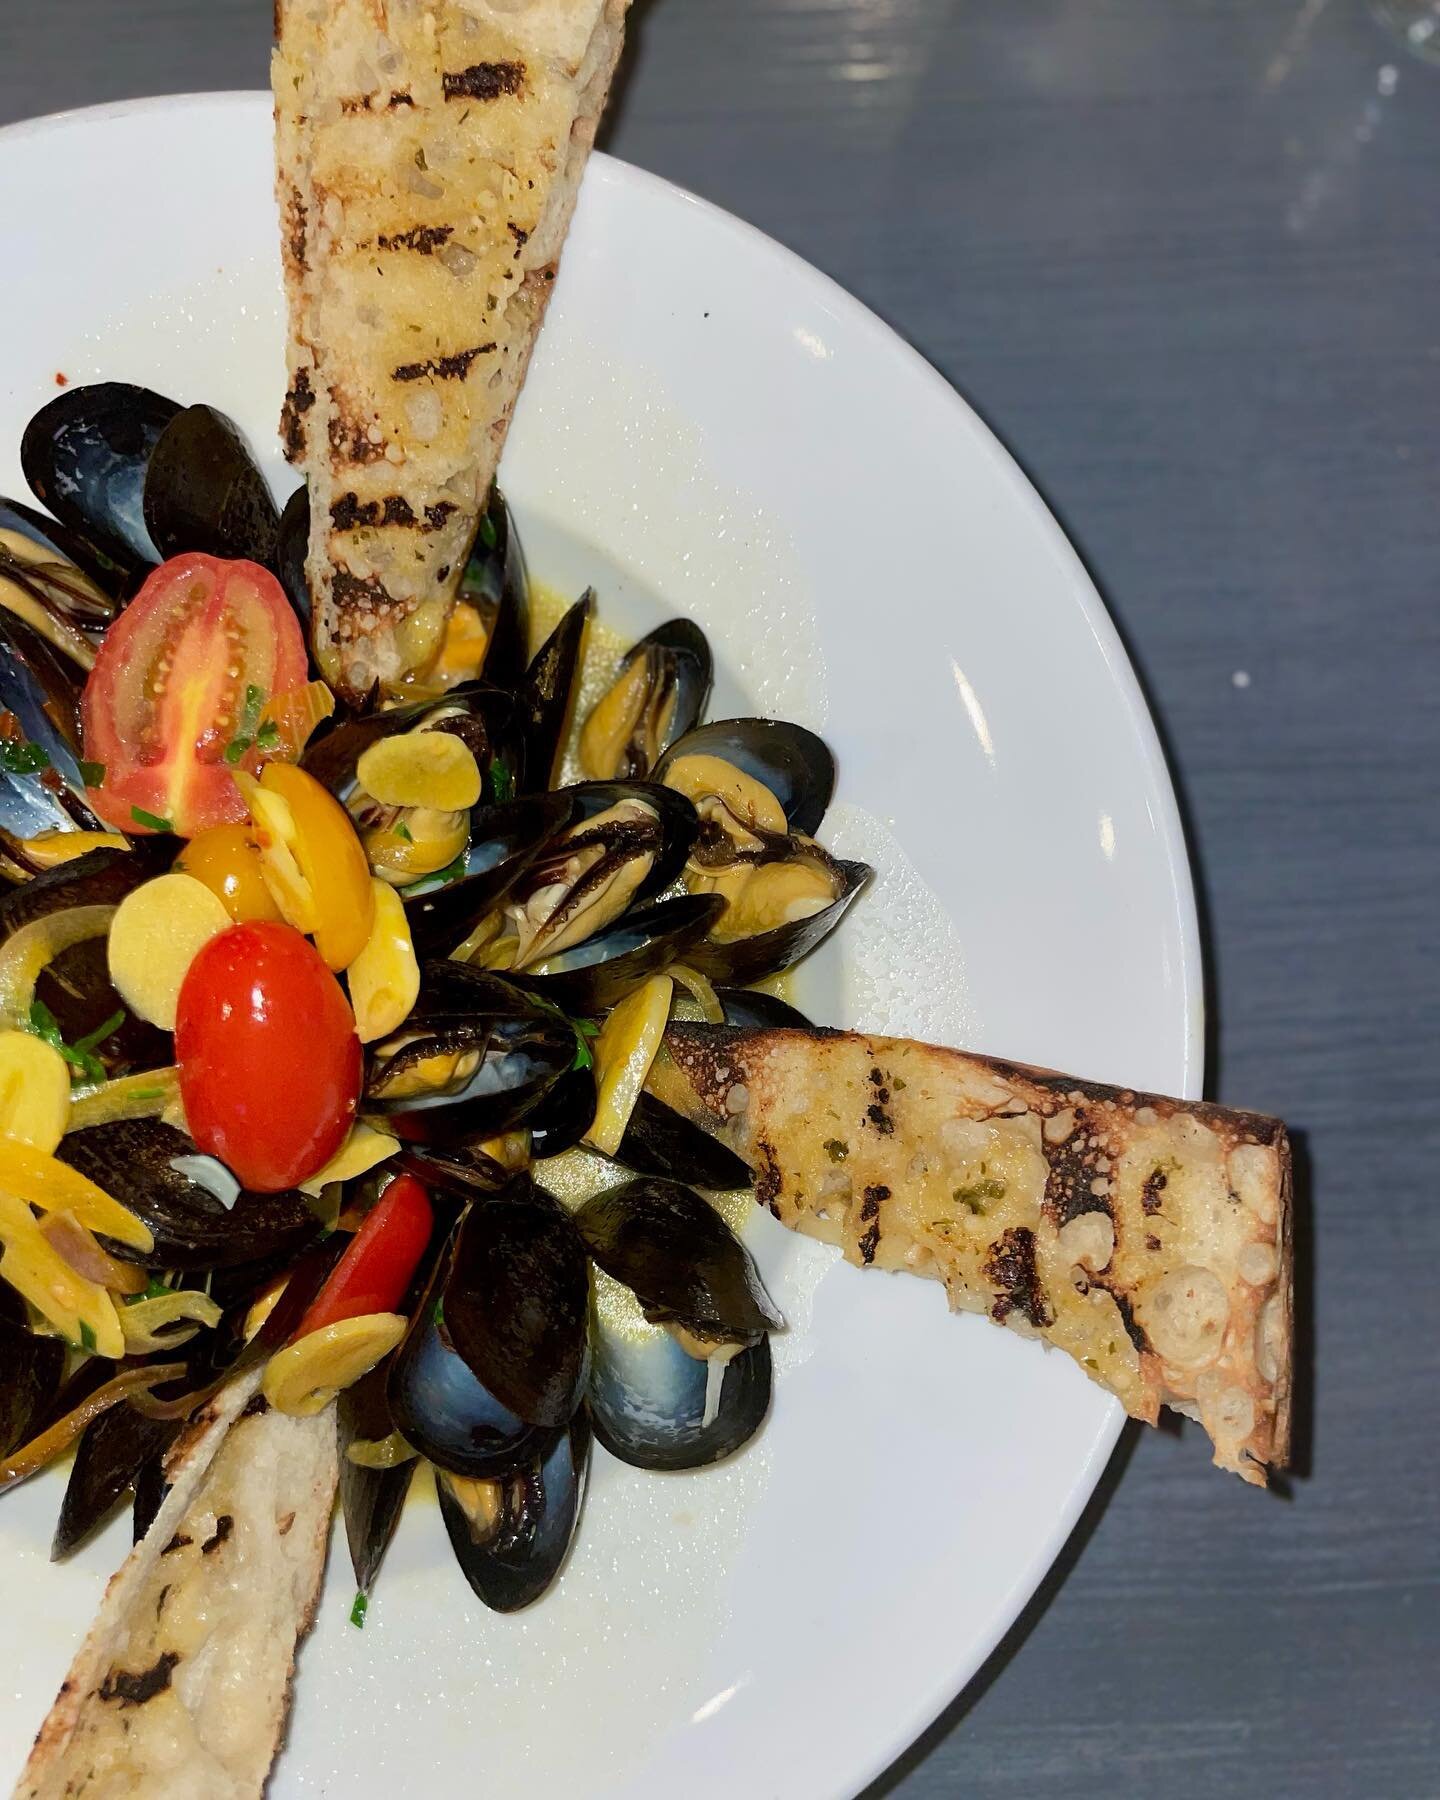 Our fresh PEI Mussels in our White Wine Butter Sauce will leave you wanting another order. 🤤

Be on the lookout &mdash; our finished menu and website are dropping soon! 

#thehamptons #hamptonbays #finsandforks #freshseafood #southampton #longisland